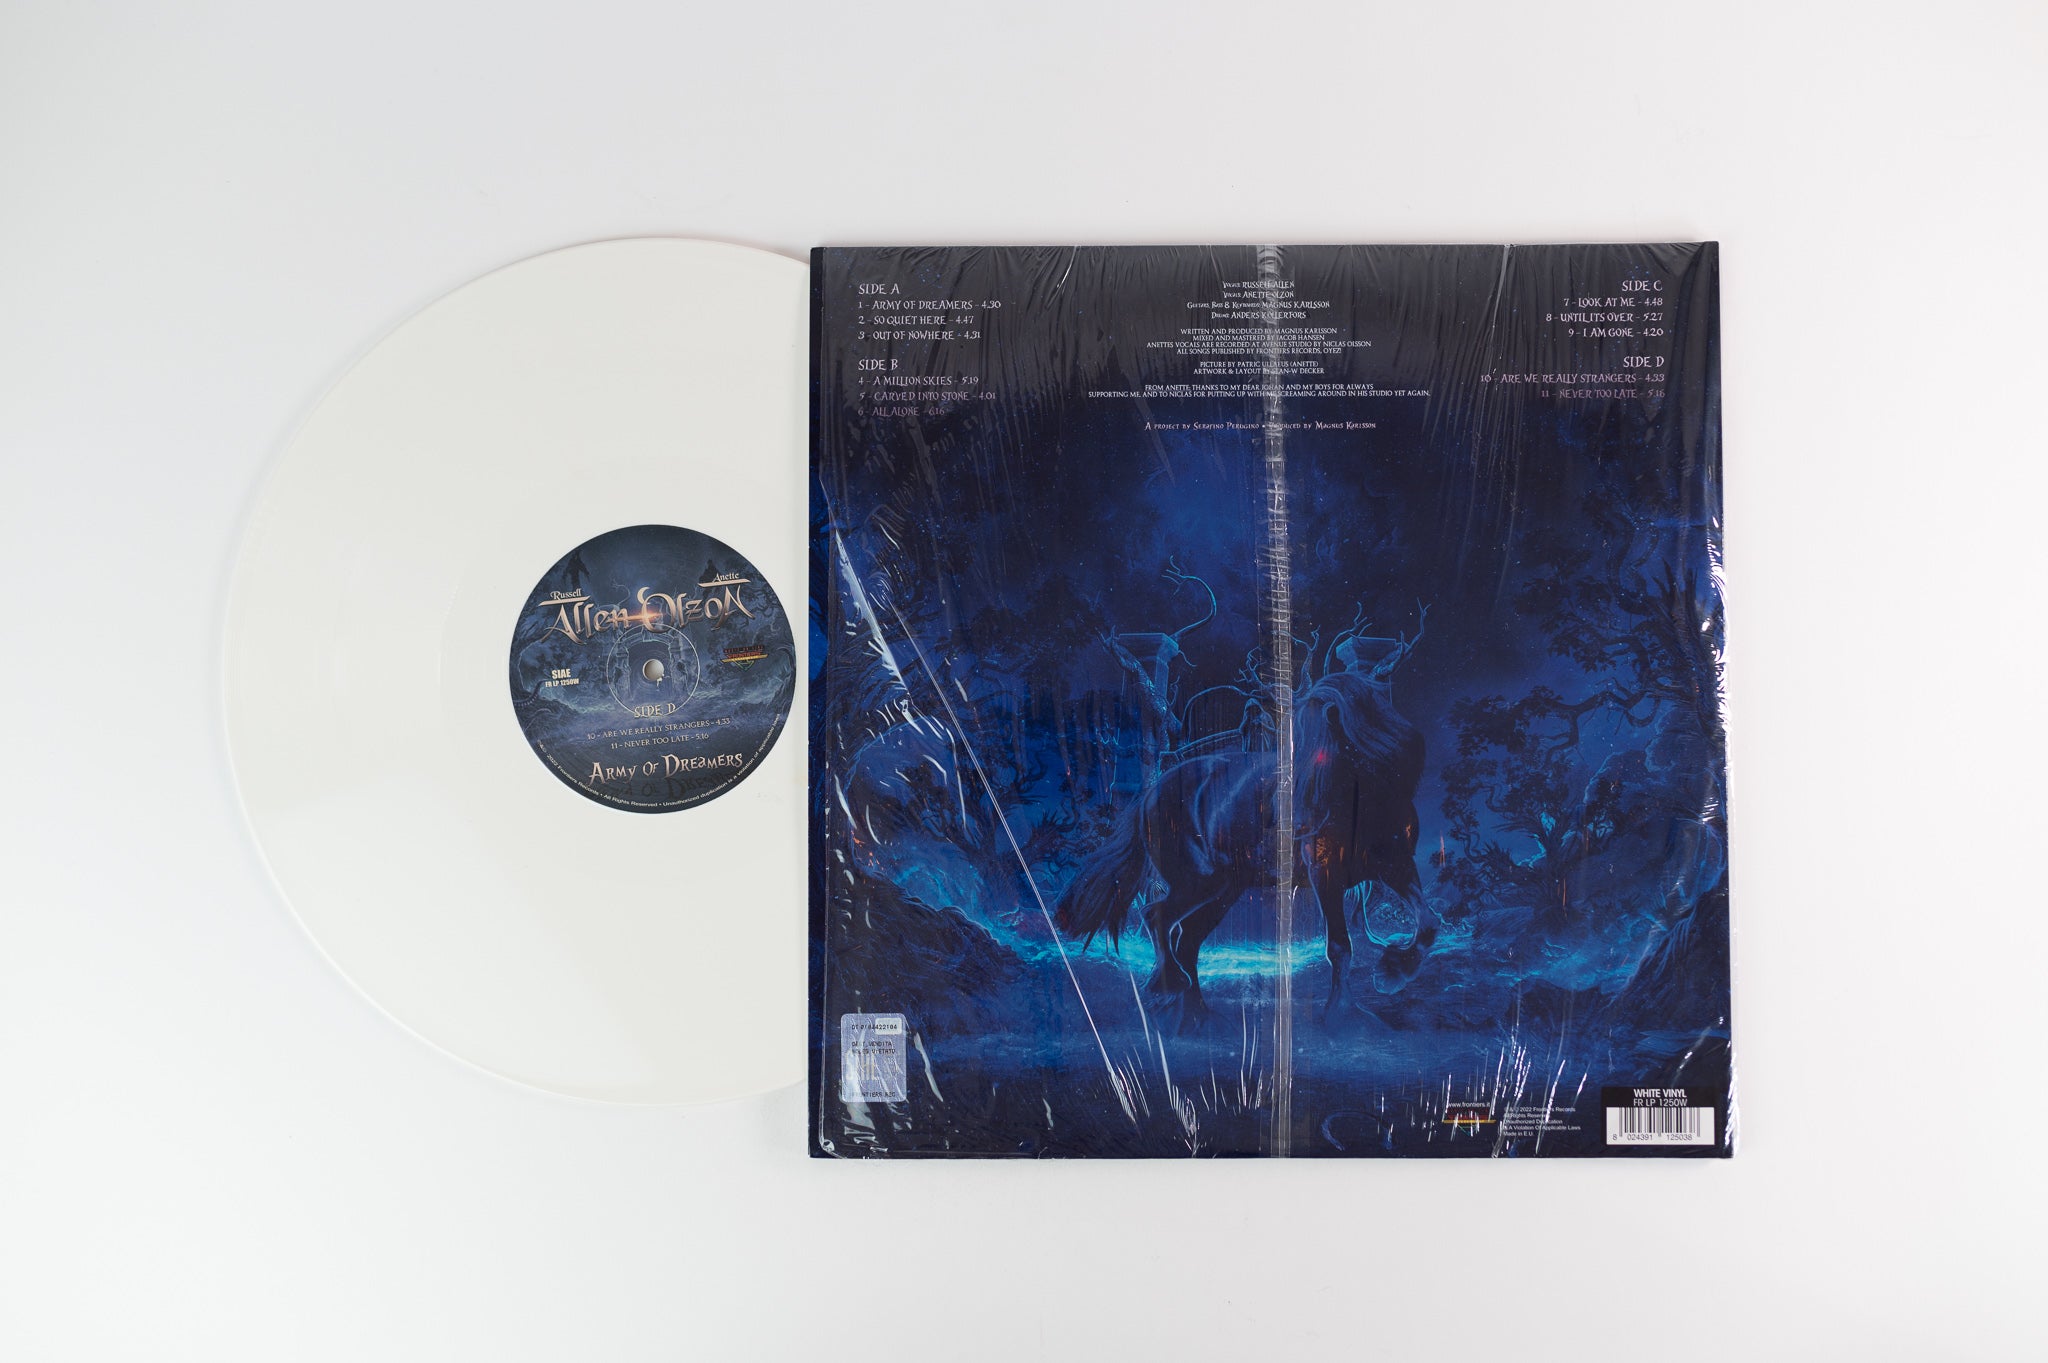 Allen / Olzon - Army of Dreamers on Frontiers Music - White Vinyl